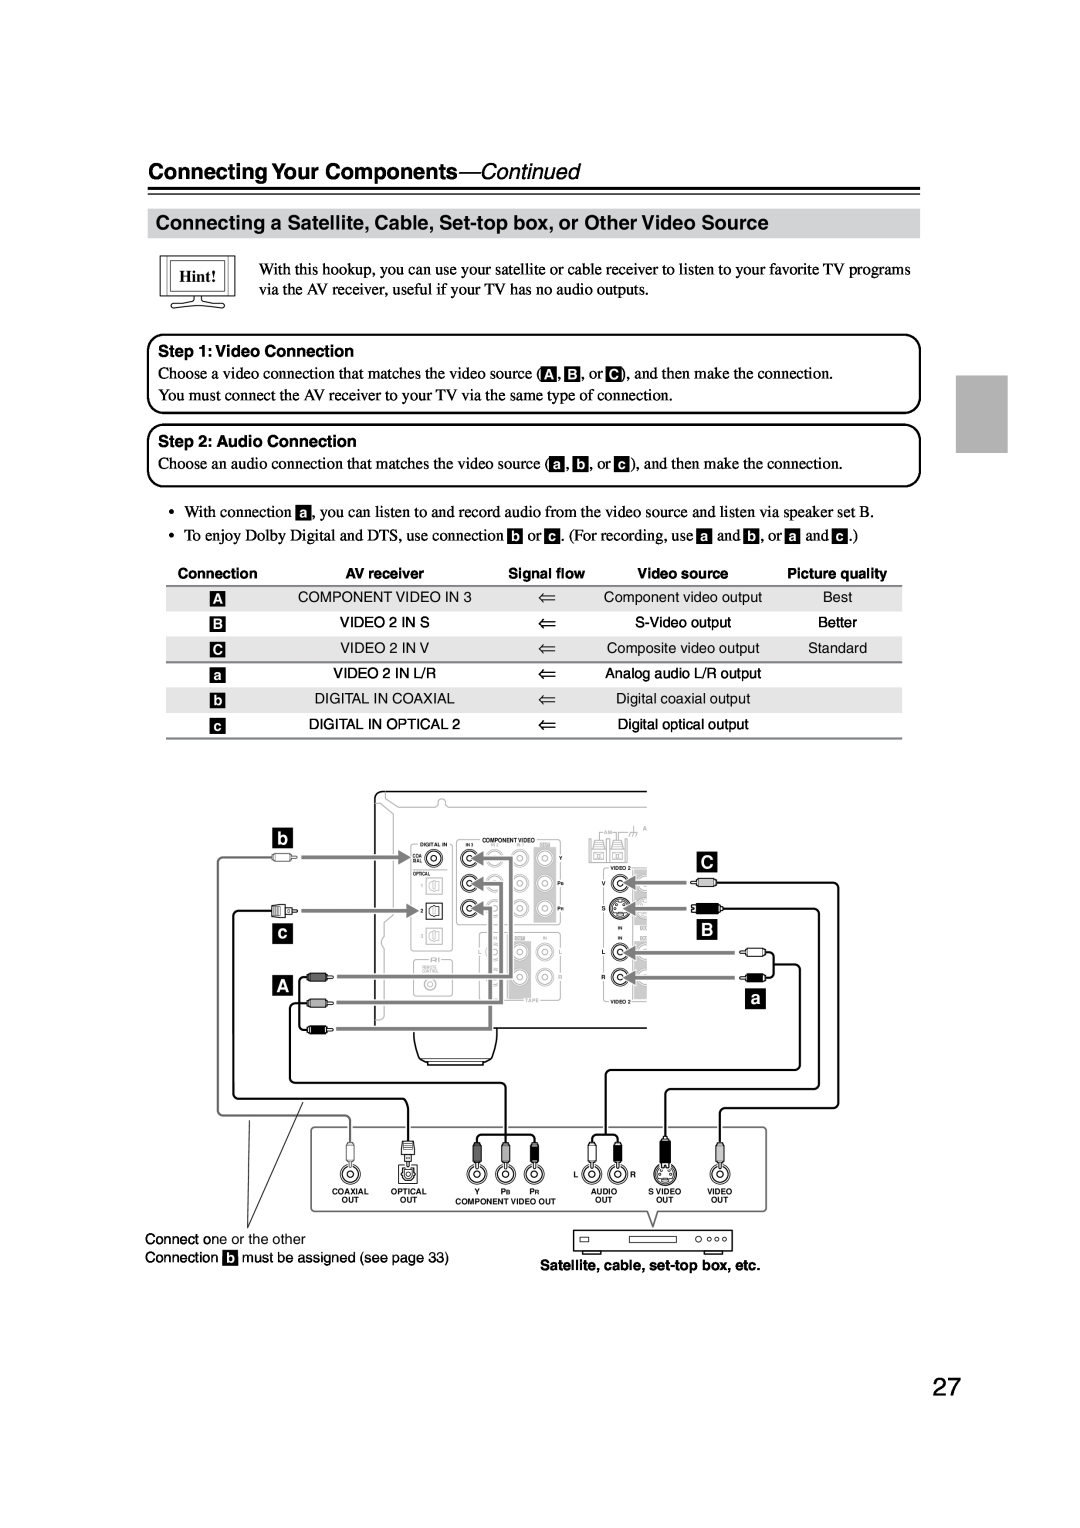 Onkyo TX-SR574 instruction manual Connecting Your Components-Continued, b c A, Hint, Satellite, cable, set-topbox, etc 